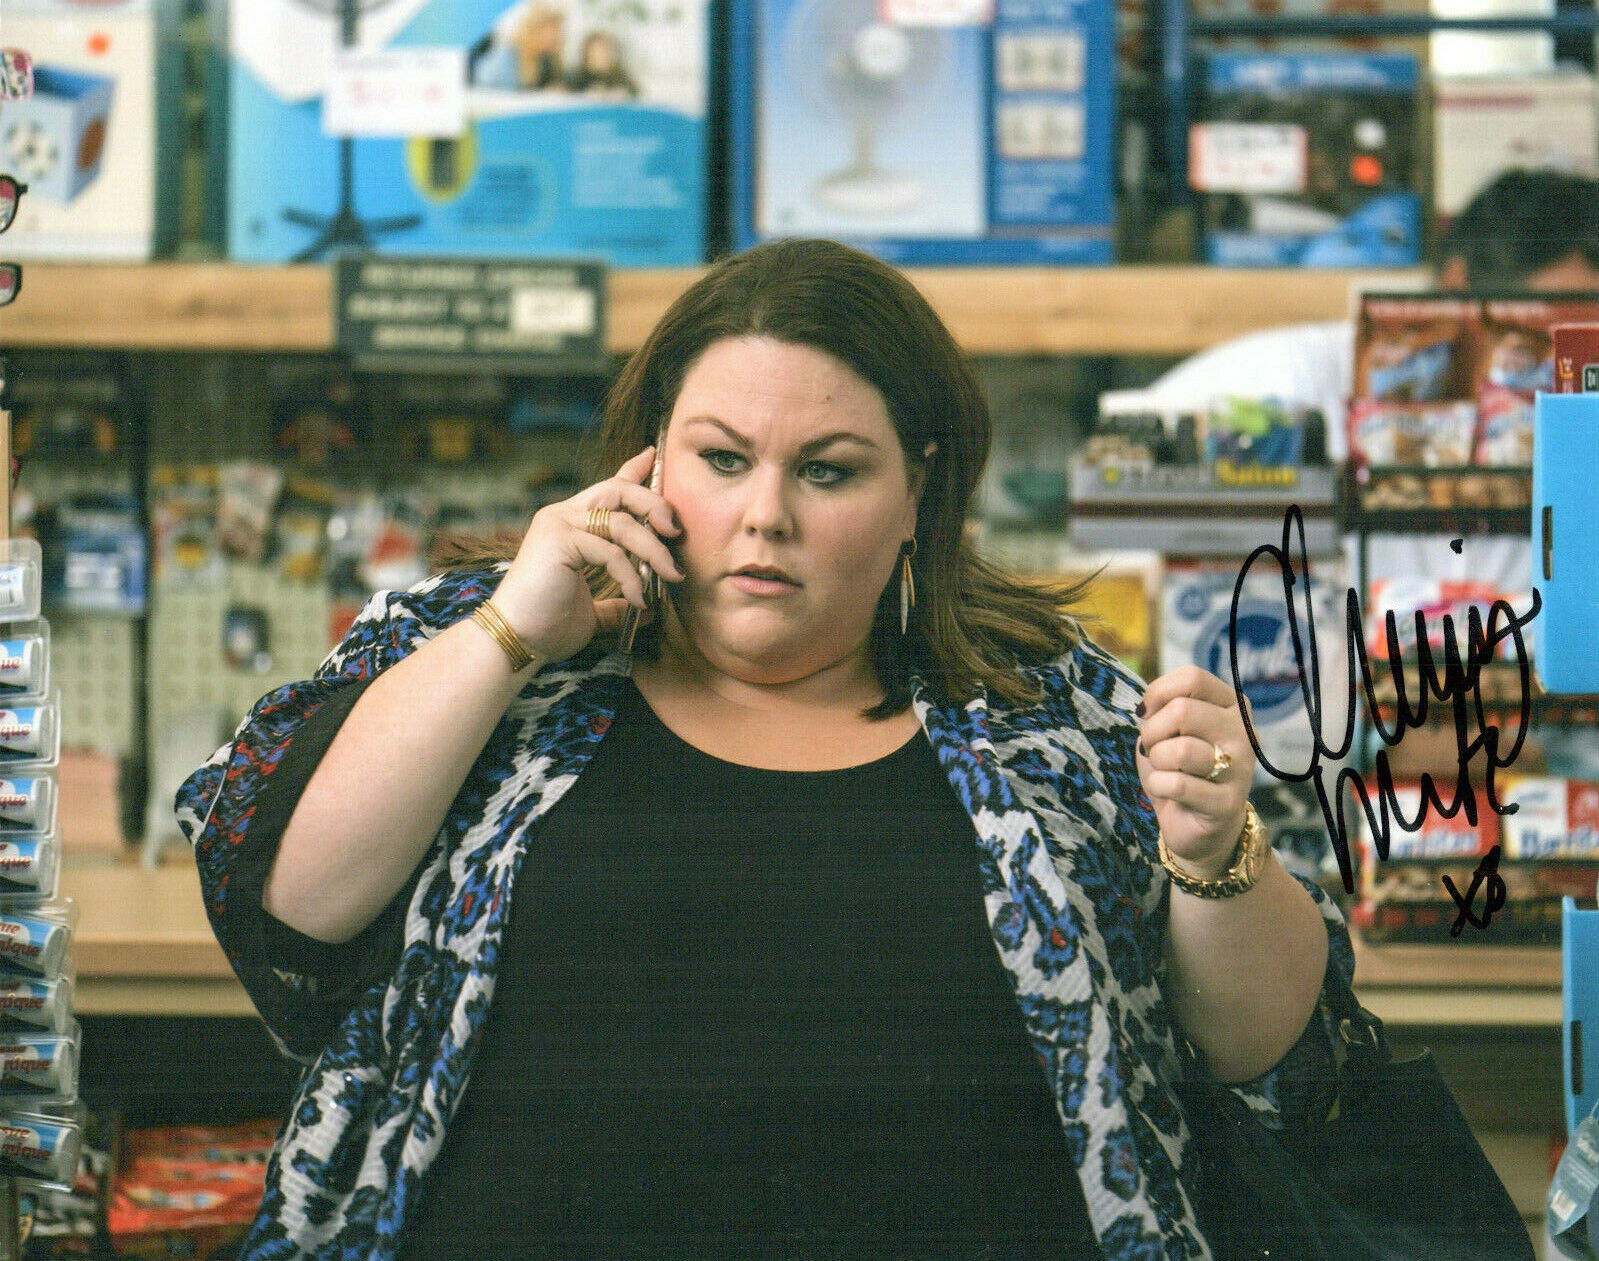 Chrissy Metz This Is Us autographed Photo Poster painting signed 8x10 #5 Kate Pearson